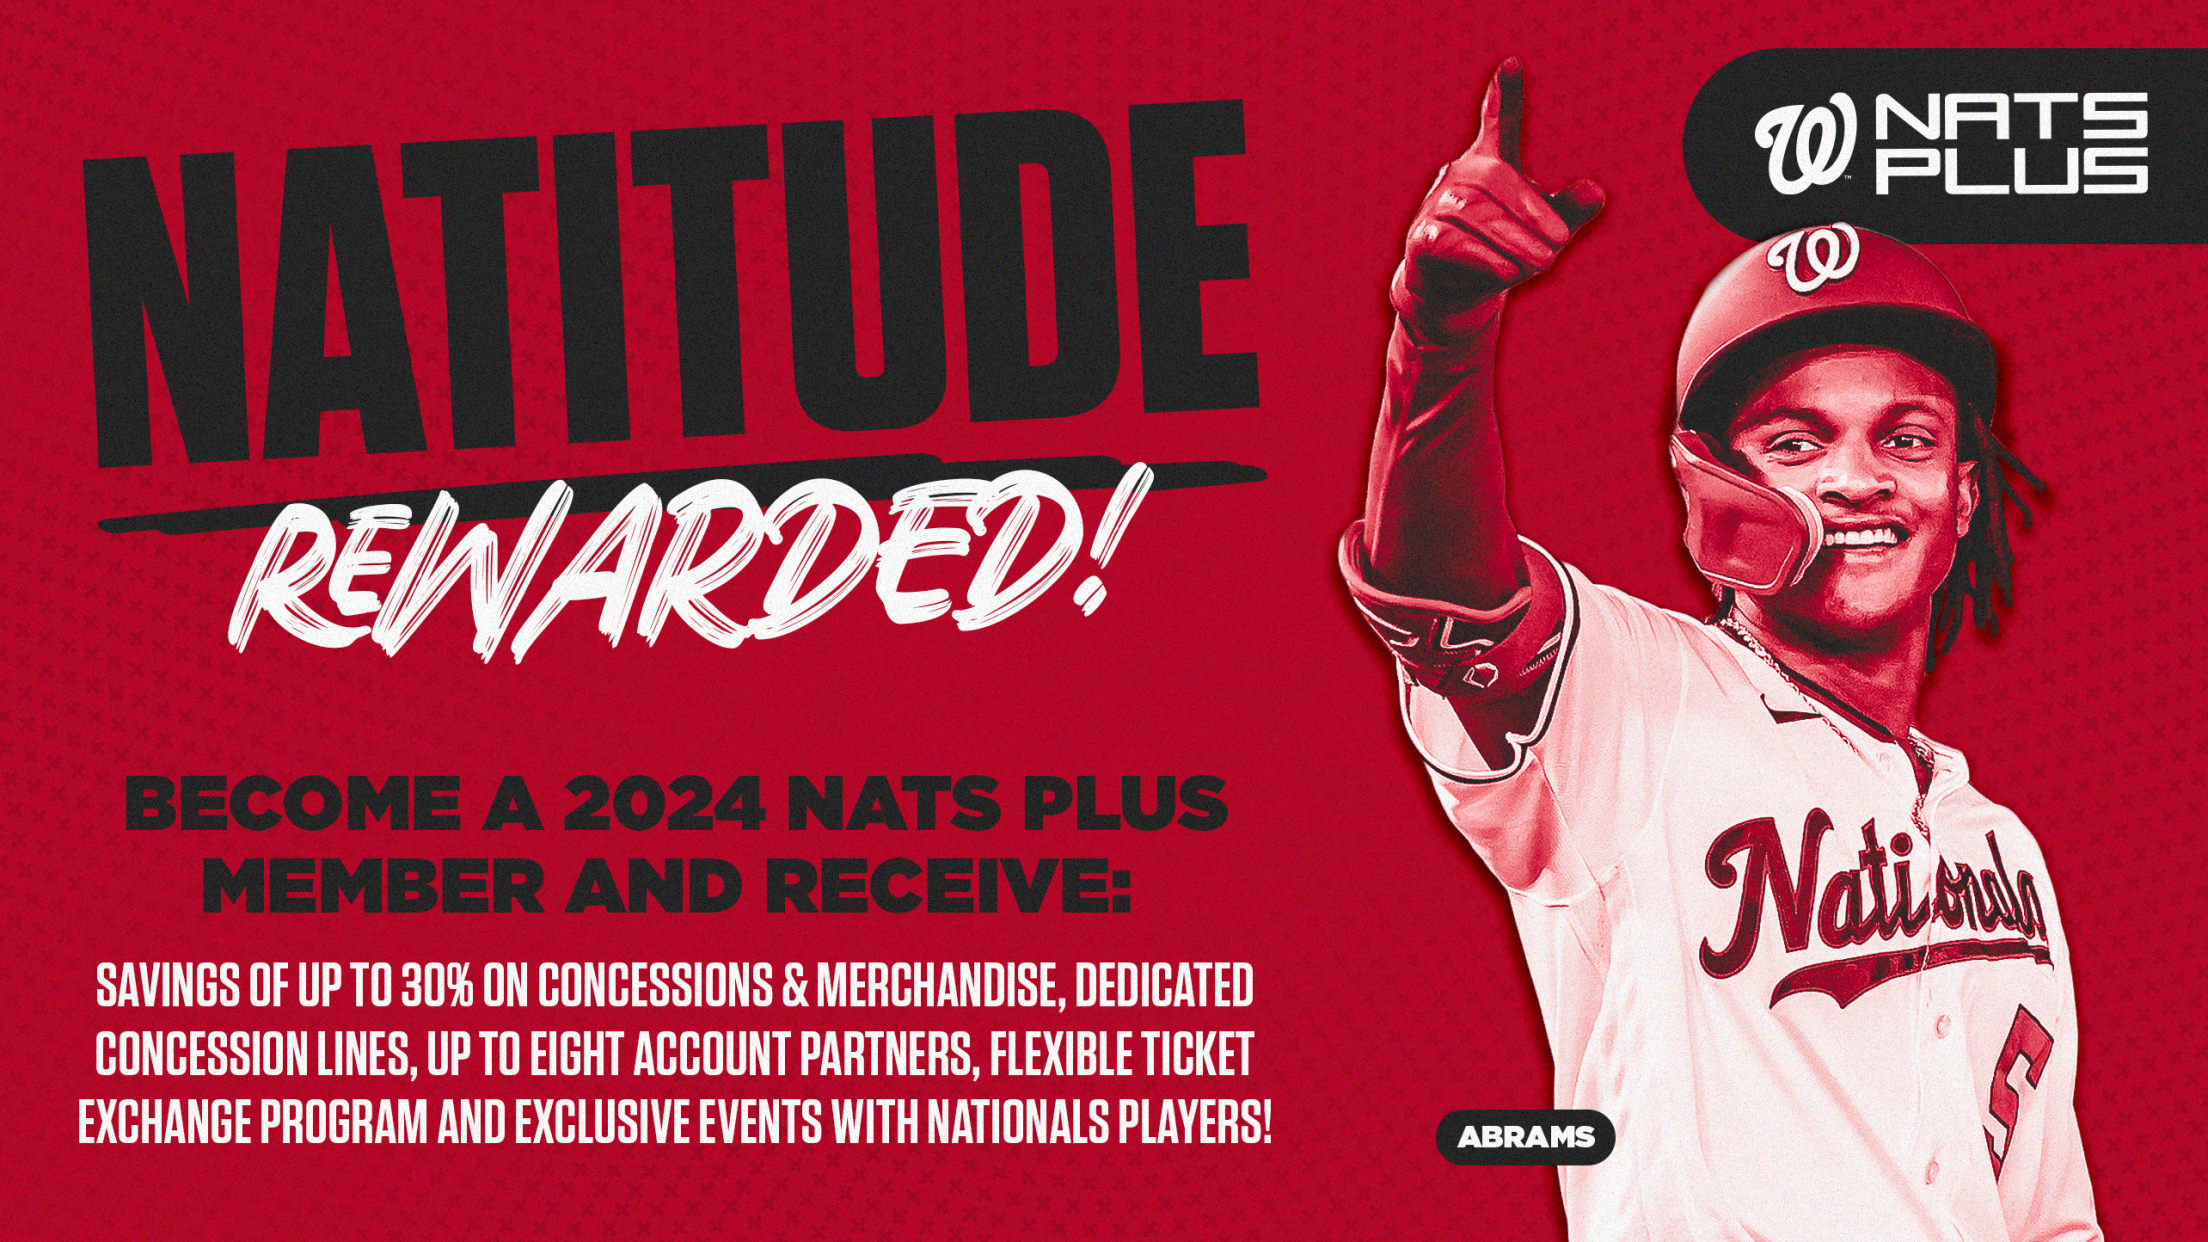 washington nationals official store